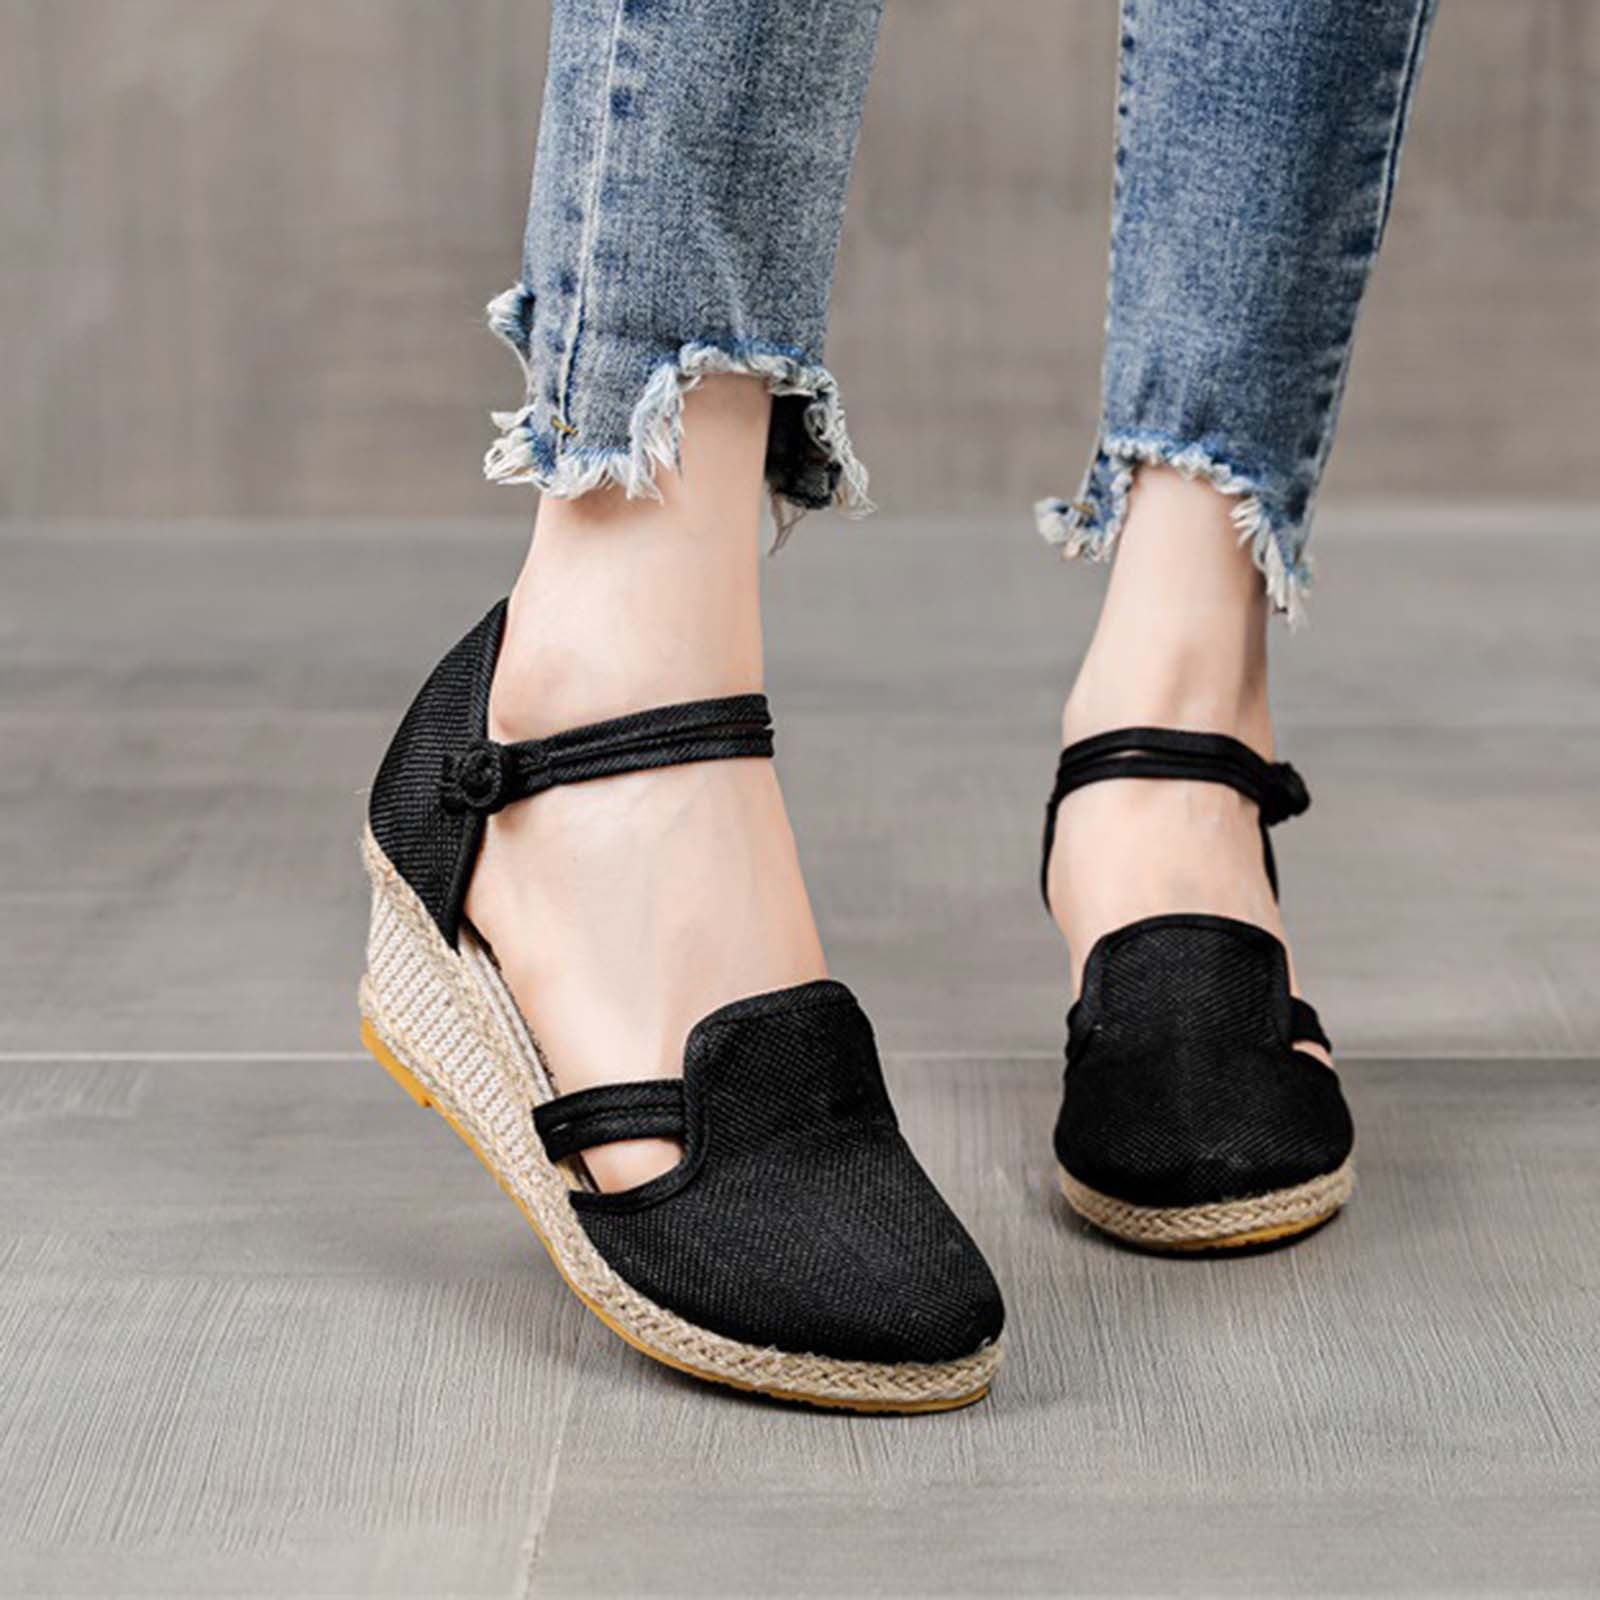 Womens sandals Sandals for Women Casual Summer,Platform Closed Toe India |  Ubuy